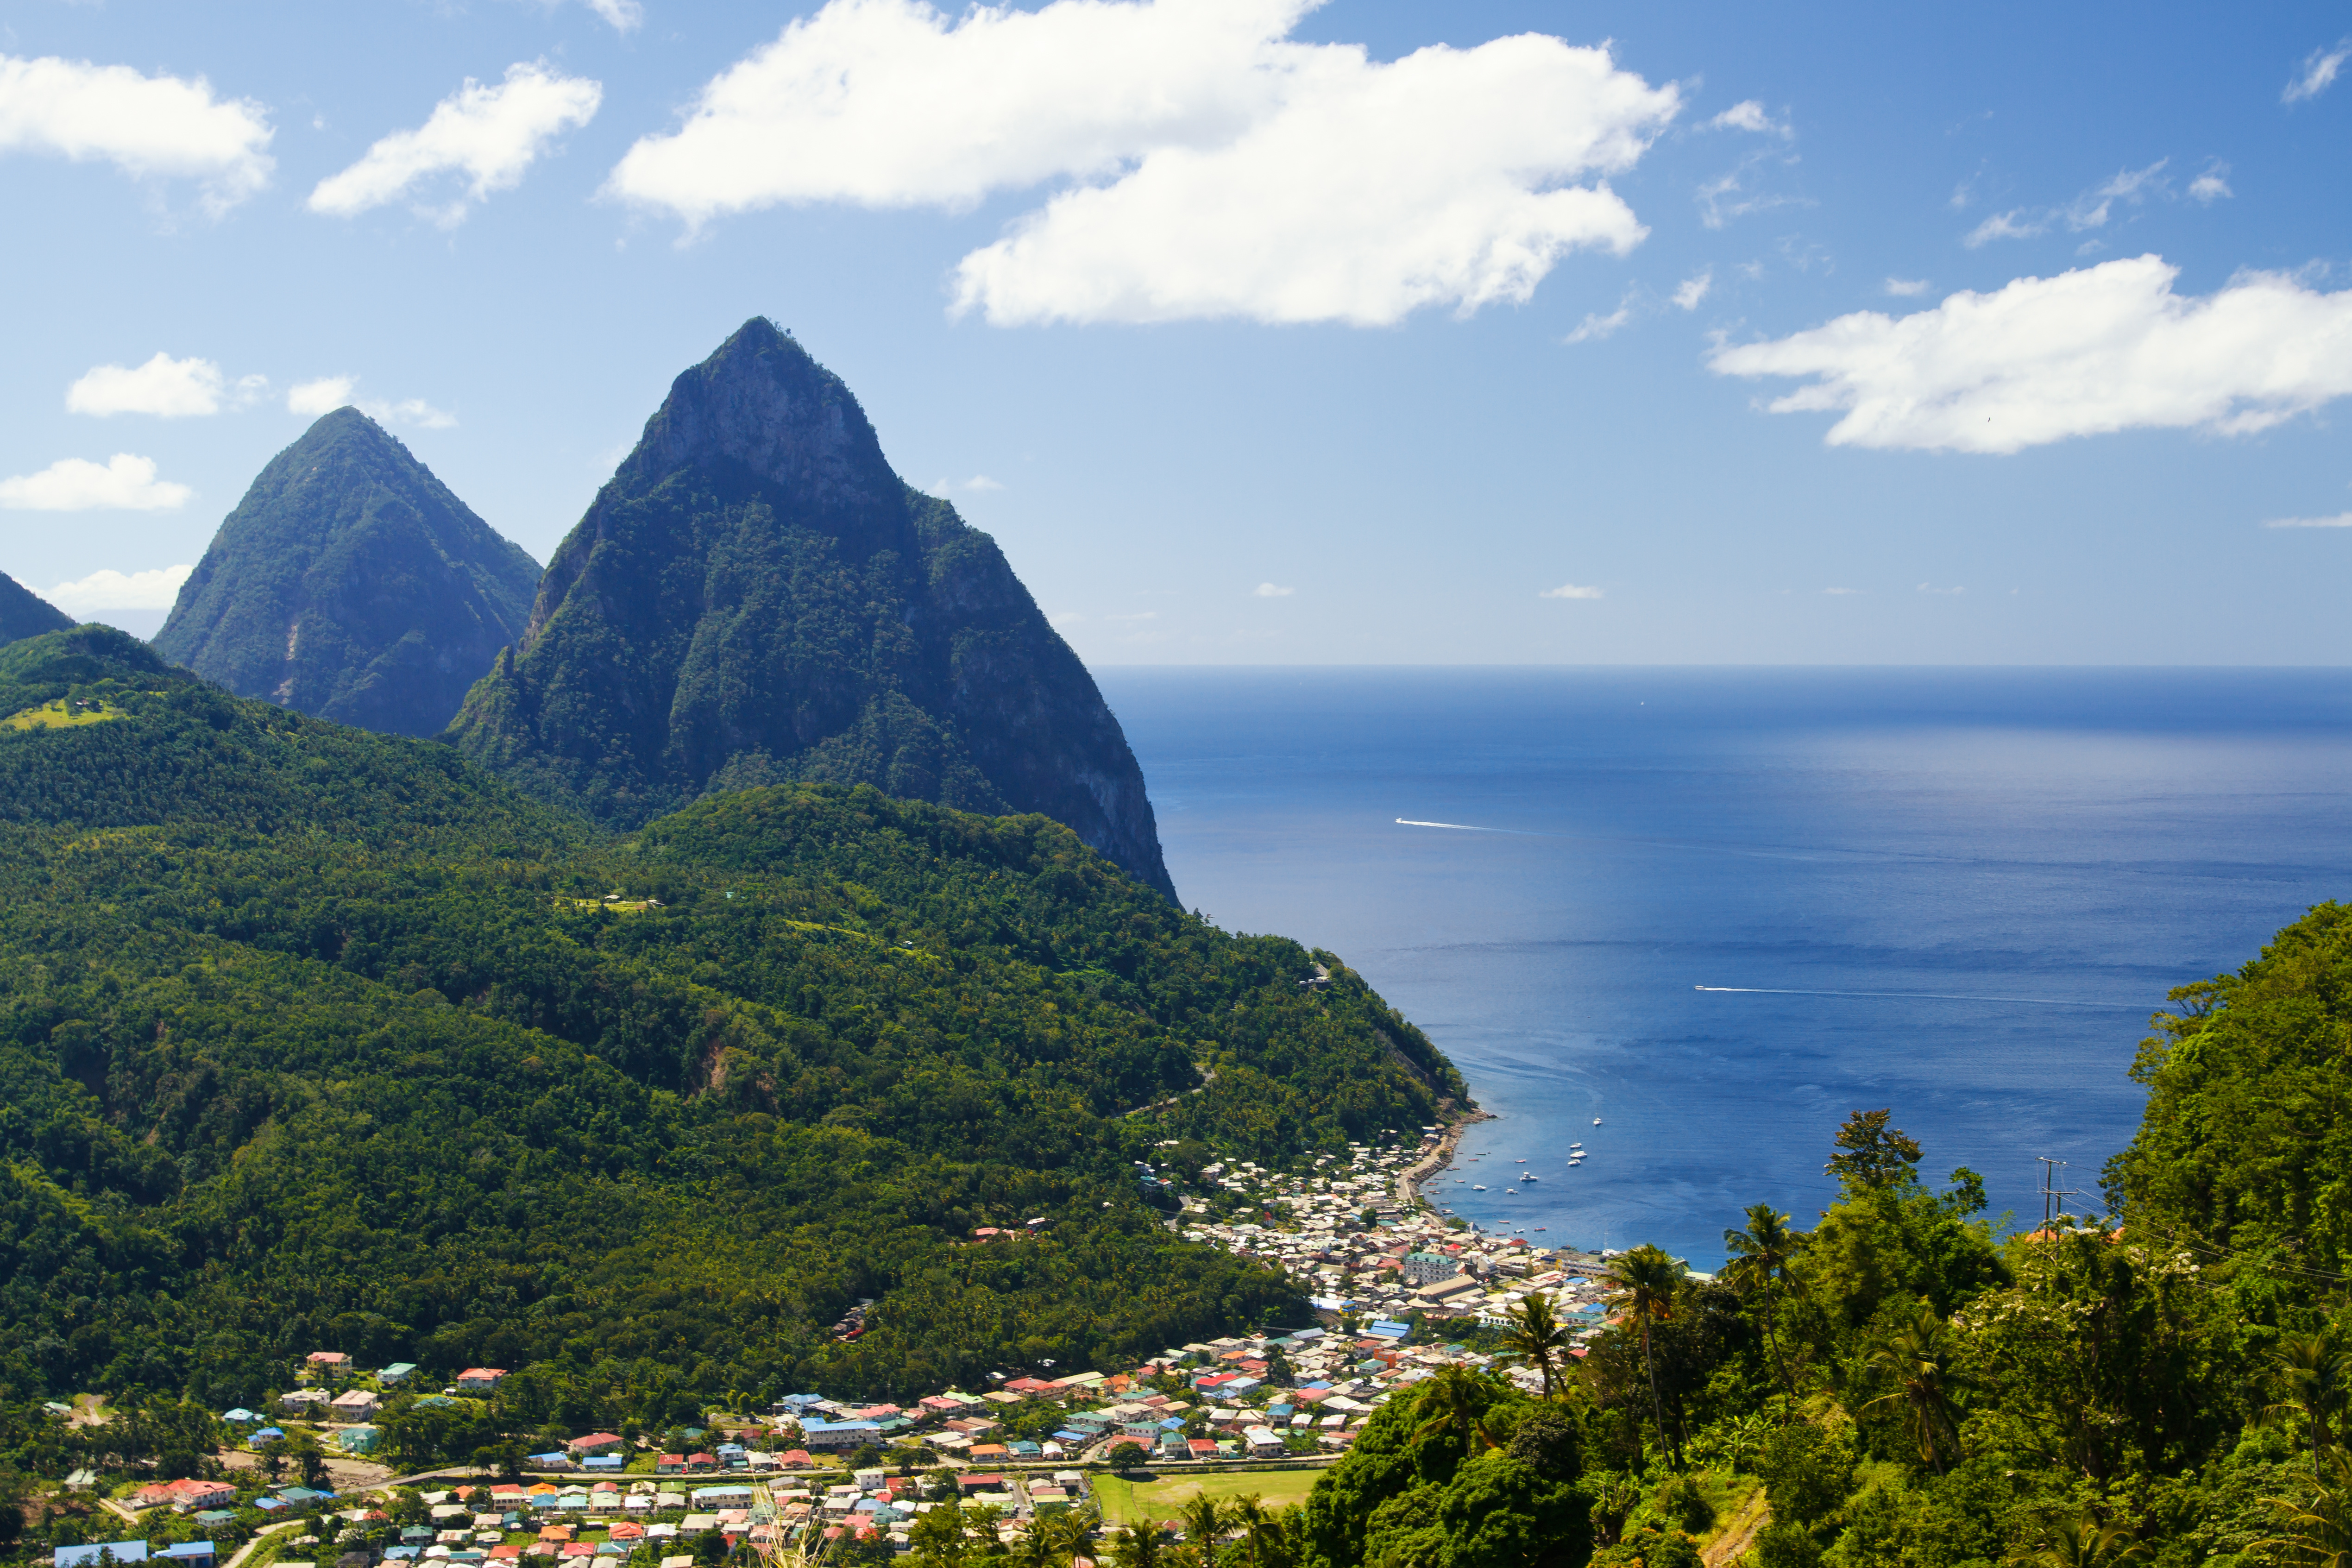 The Piton Mountains in St. Lucia